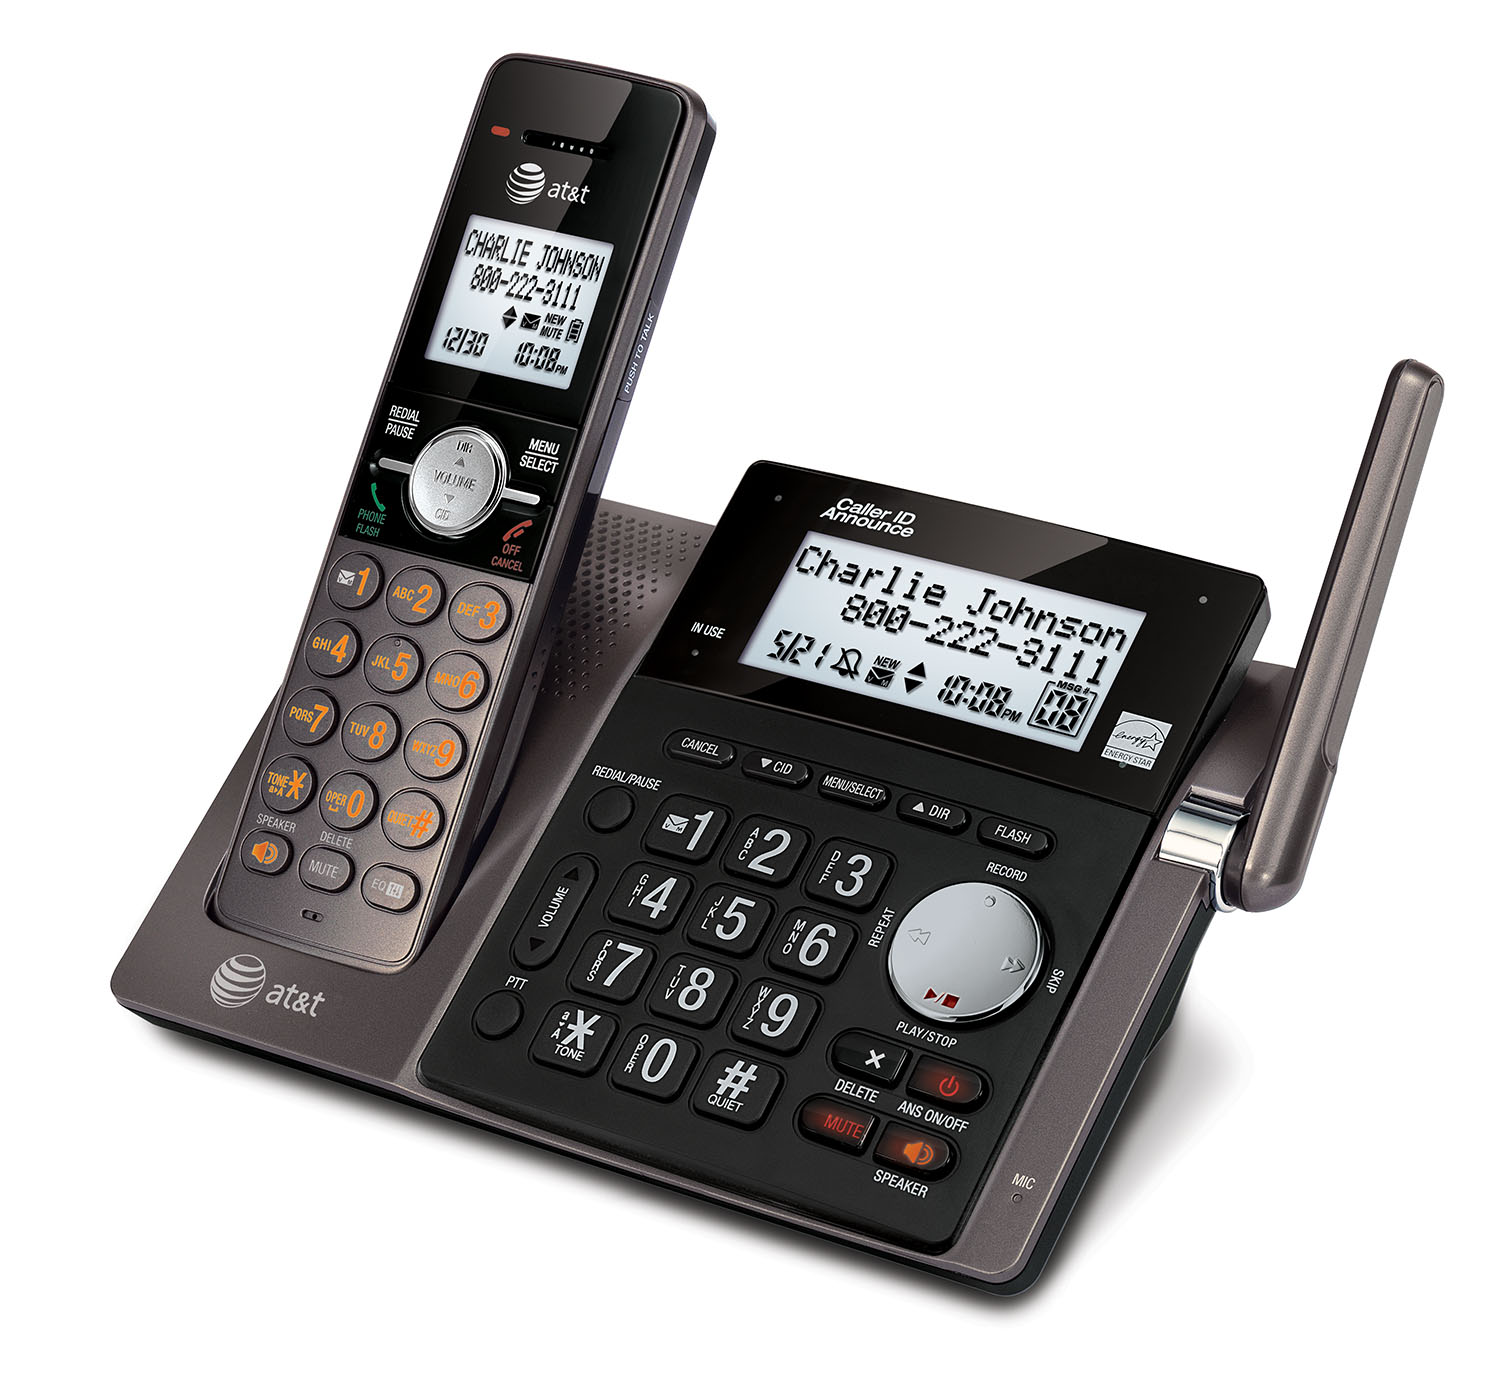 4 handset cordless answering system with caller ID/call waiting - view 3